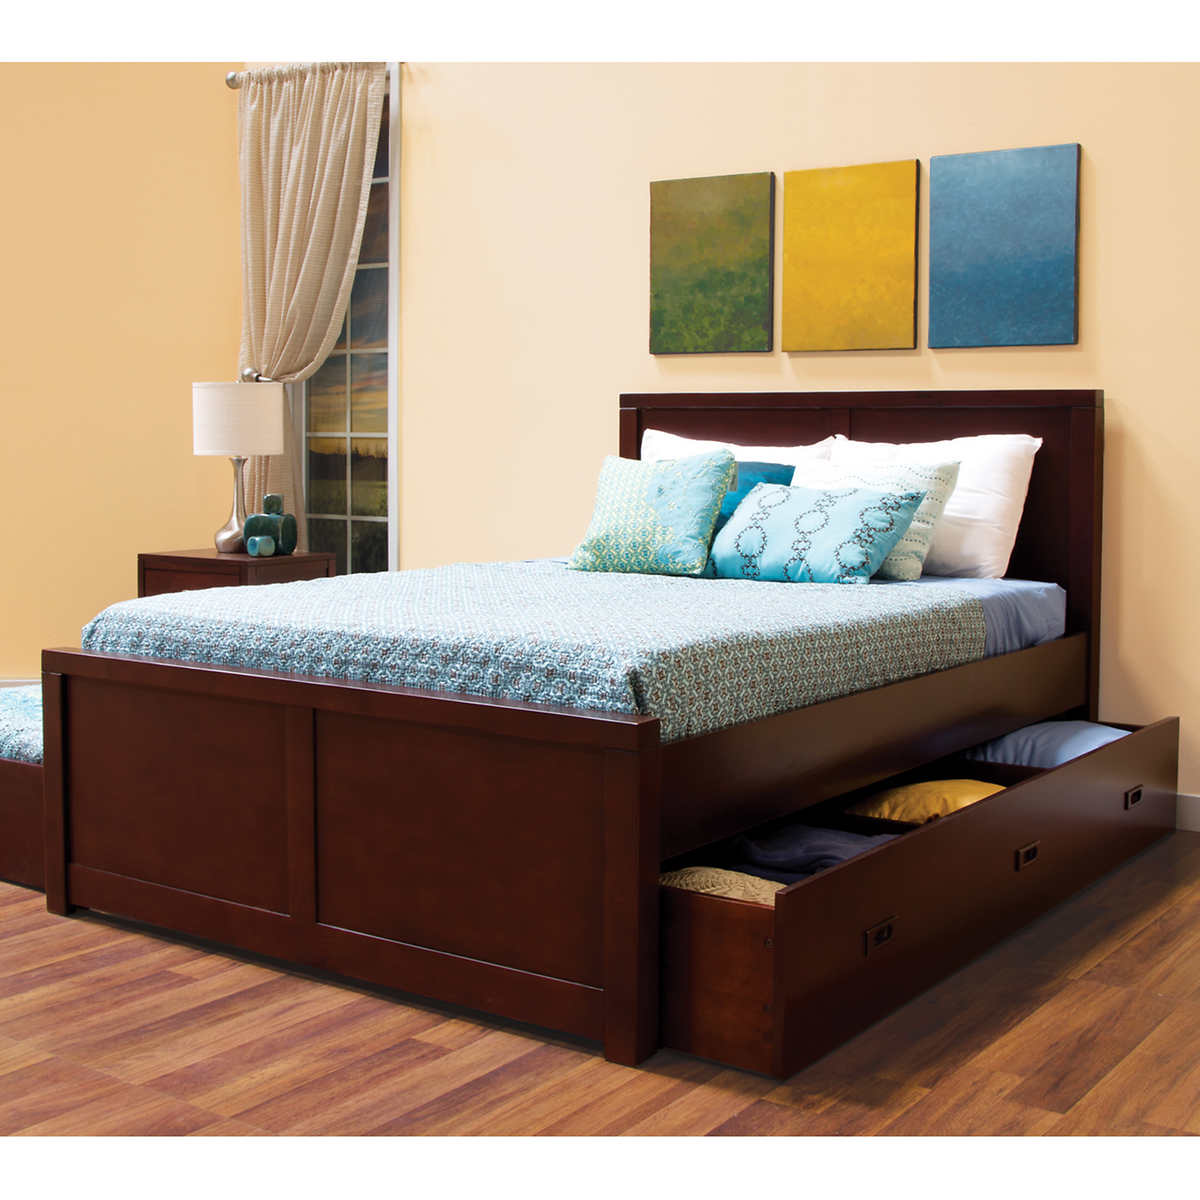 Peyton Full Bed With Trundle And, Costco King Bed Frame With Storage